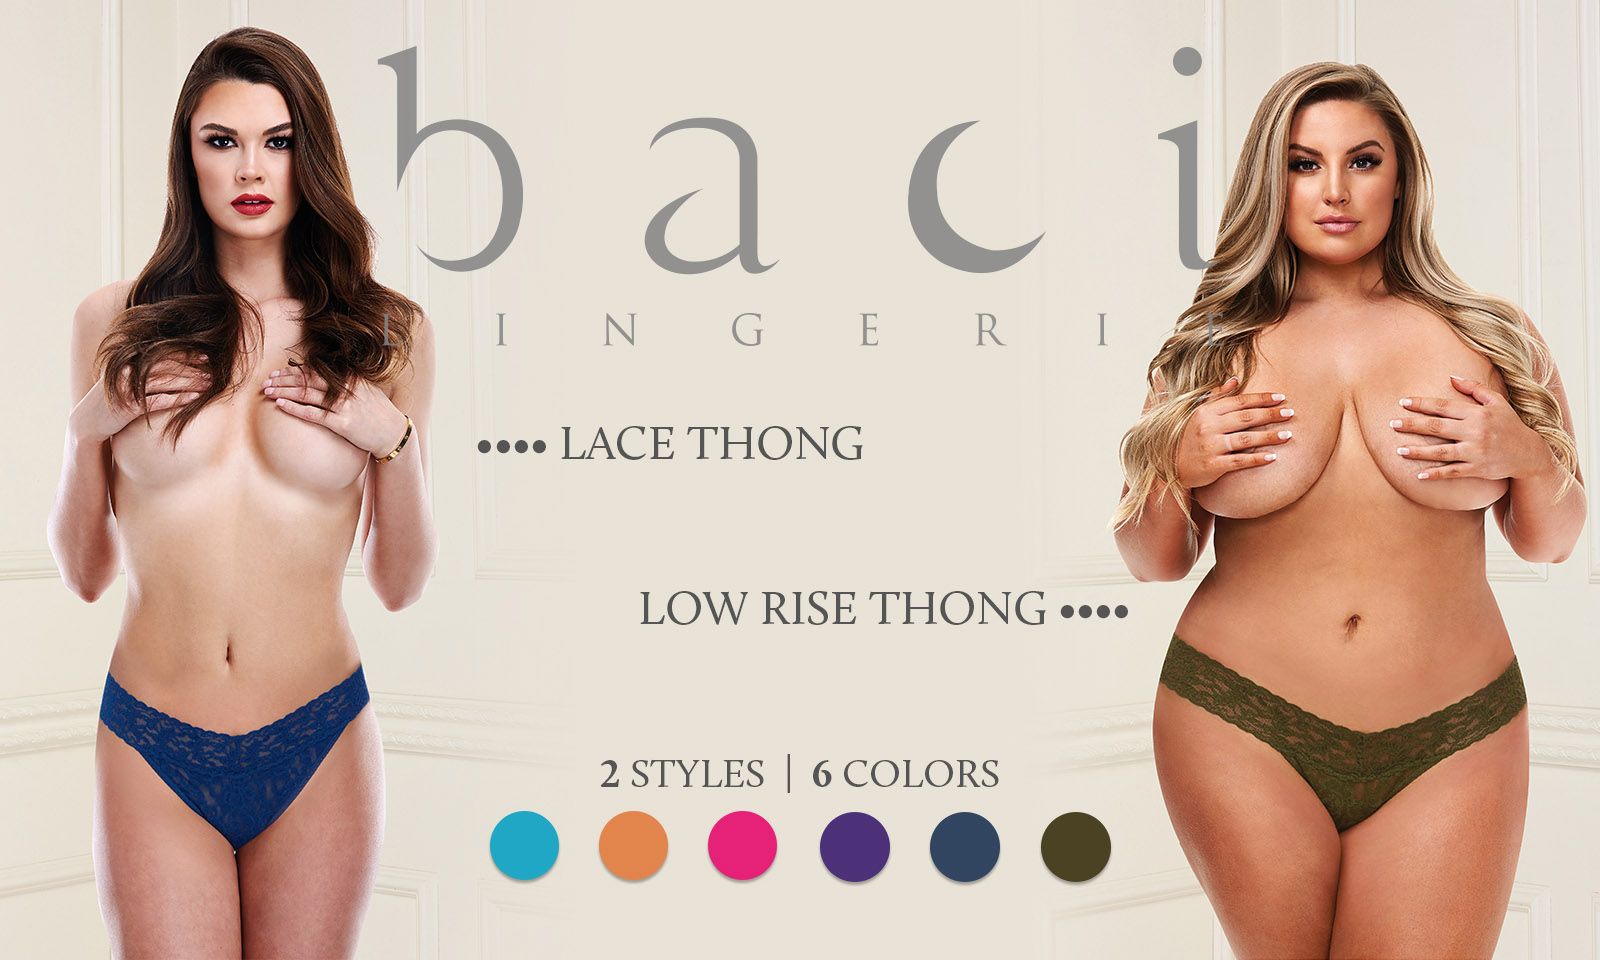 Xgen Products Now Shipping New Baci Lingerie Panties Colors